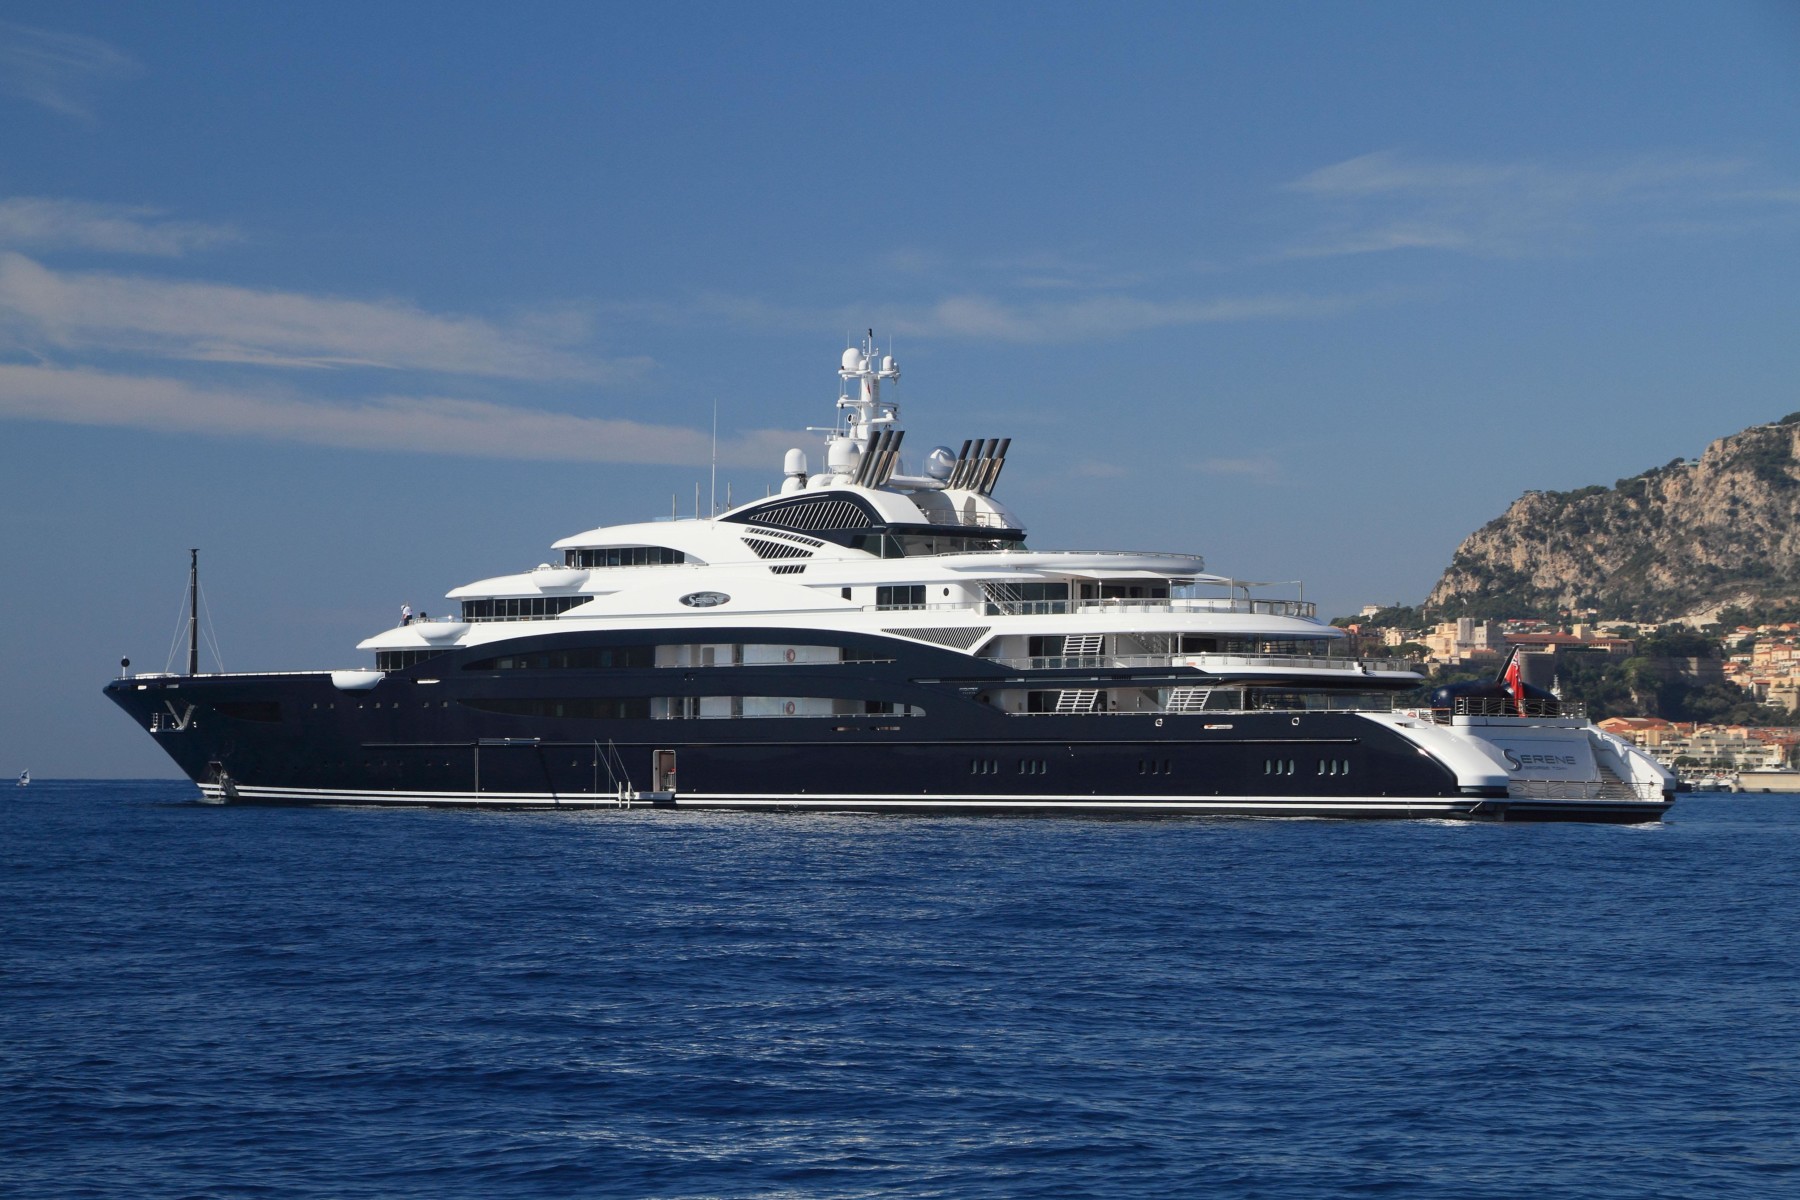 The Serene yacht owned by bin Salman is worth £380m